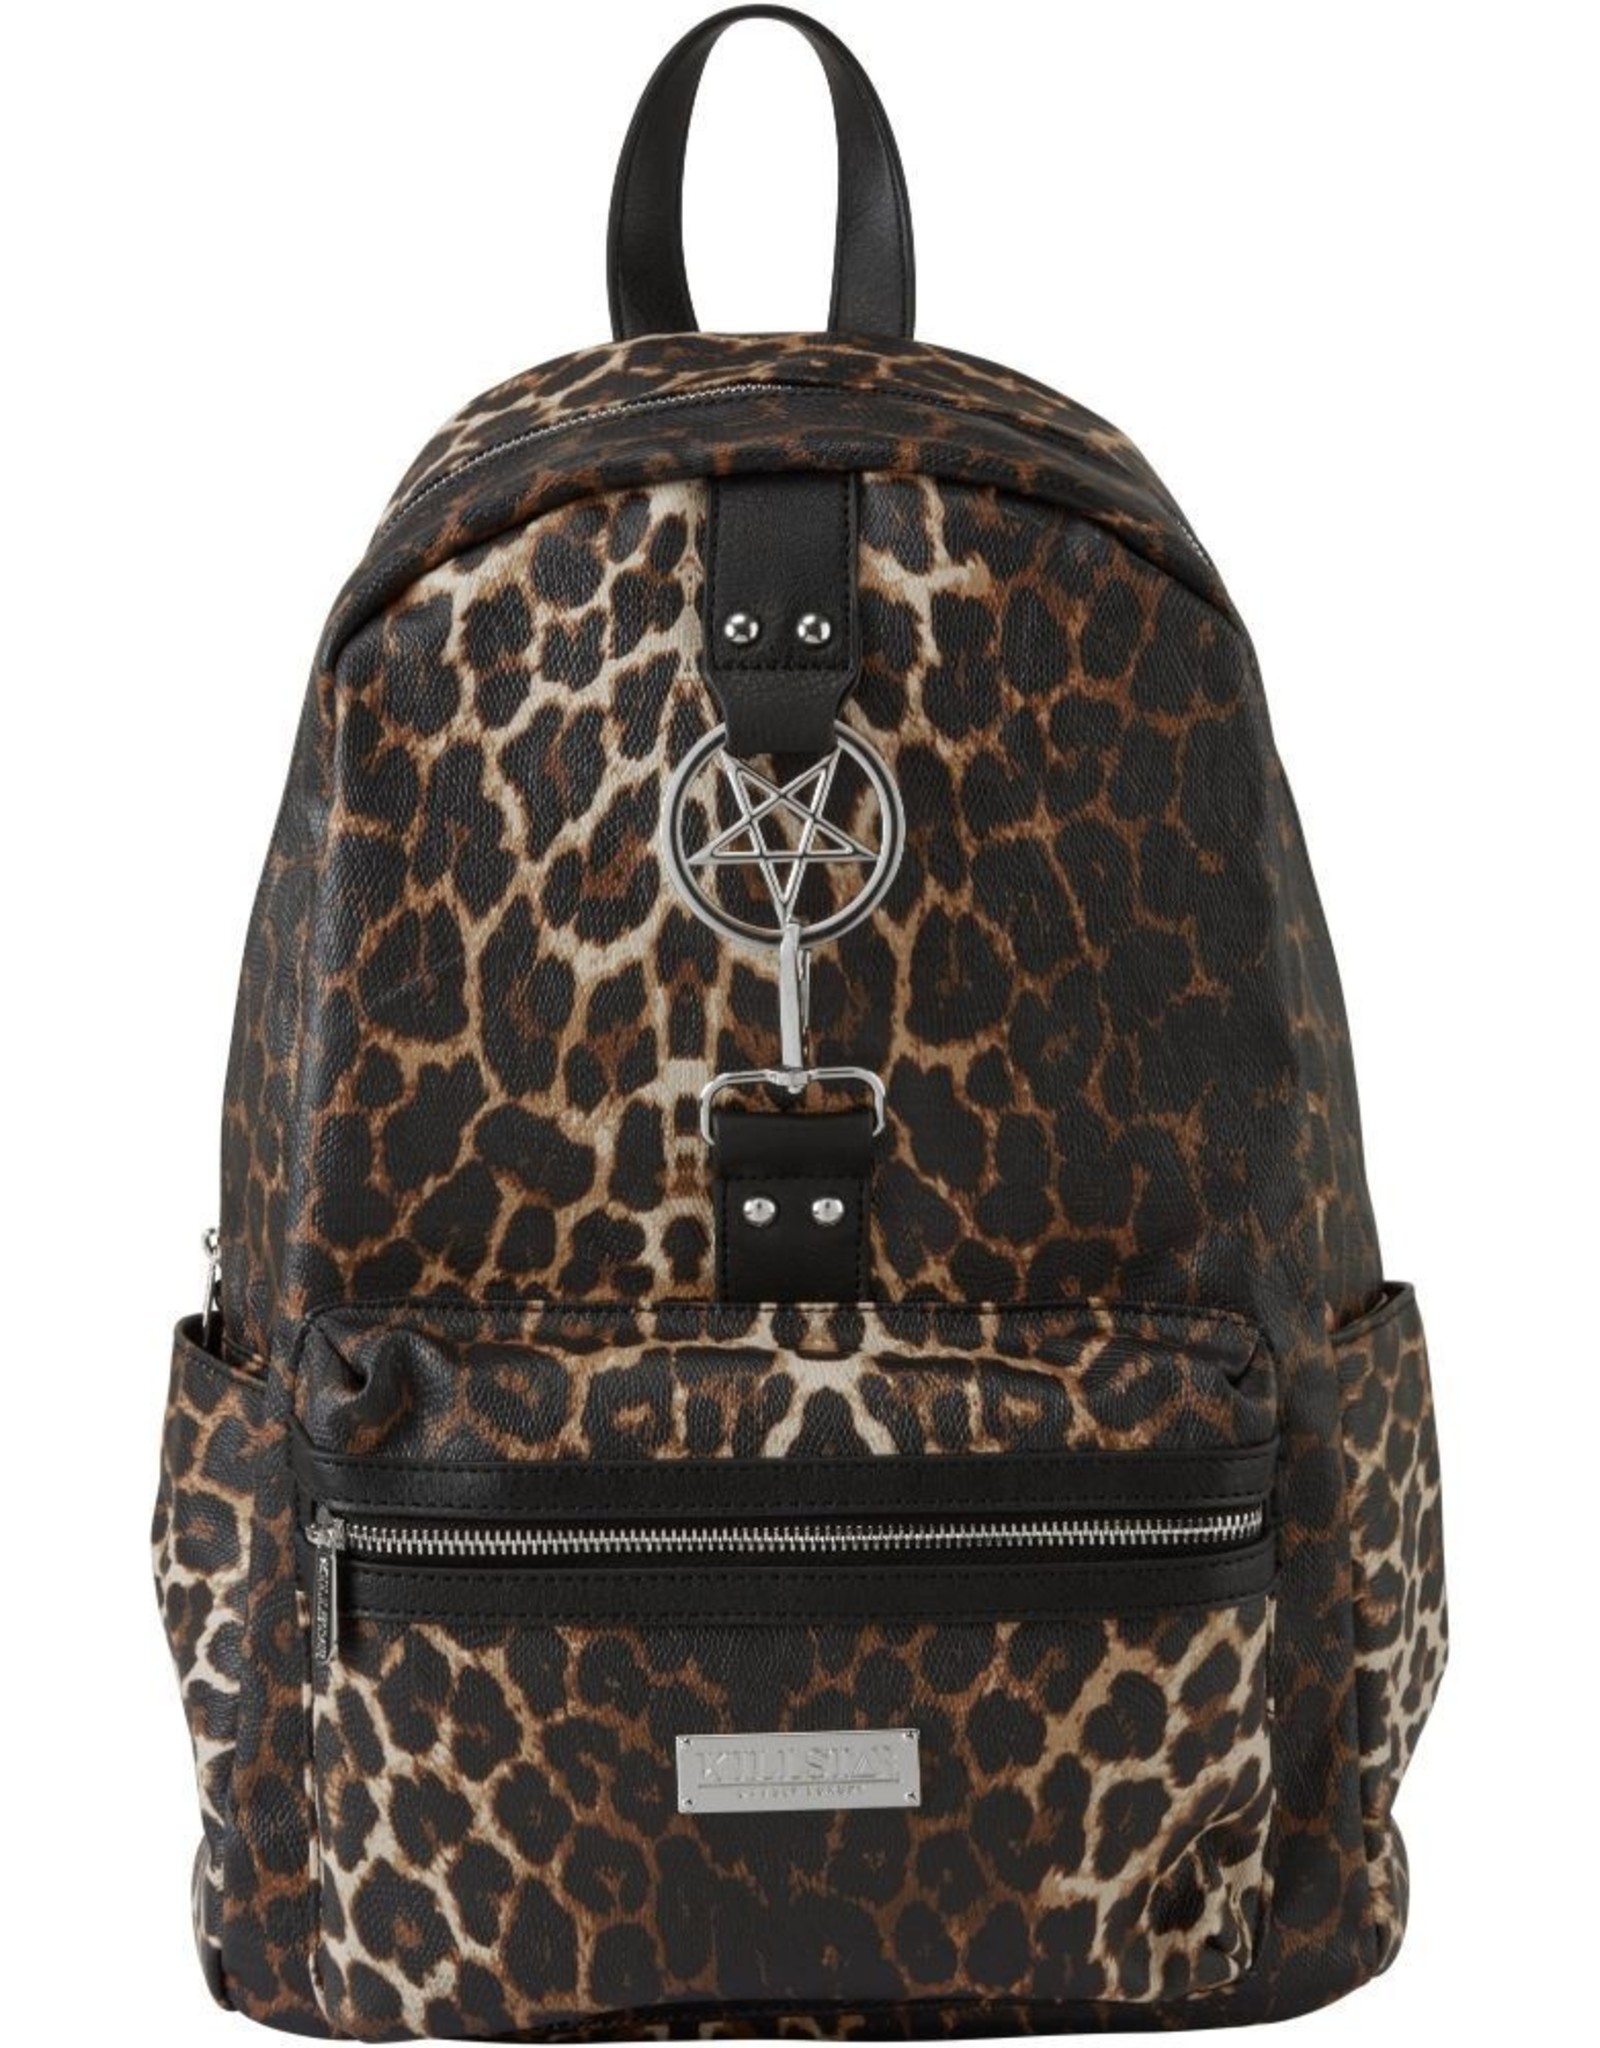 Lacoste National Geographic All Over Print Backpack, Leopard : Amazon.in:  Bags, Wallets and Luggage